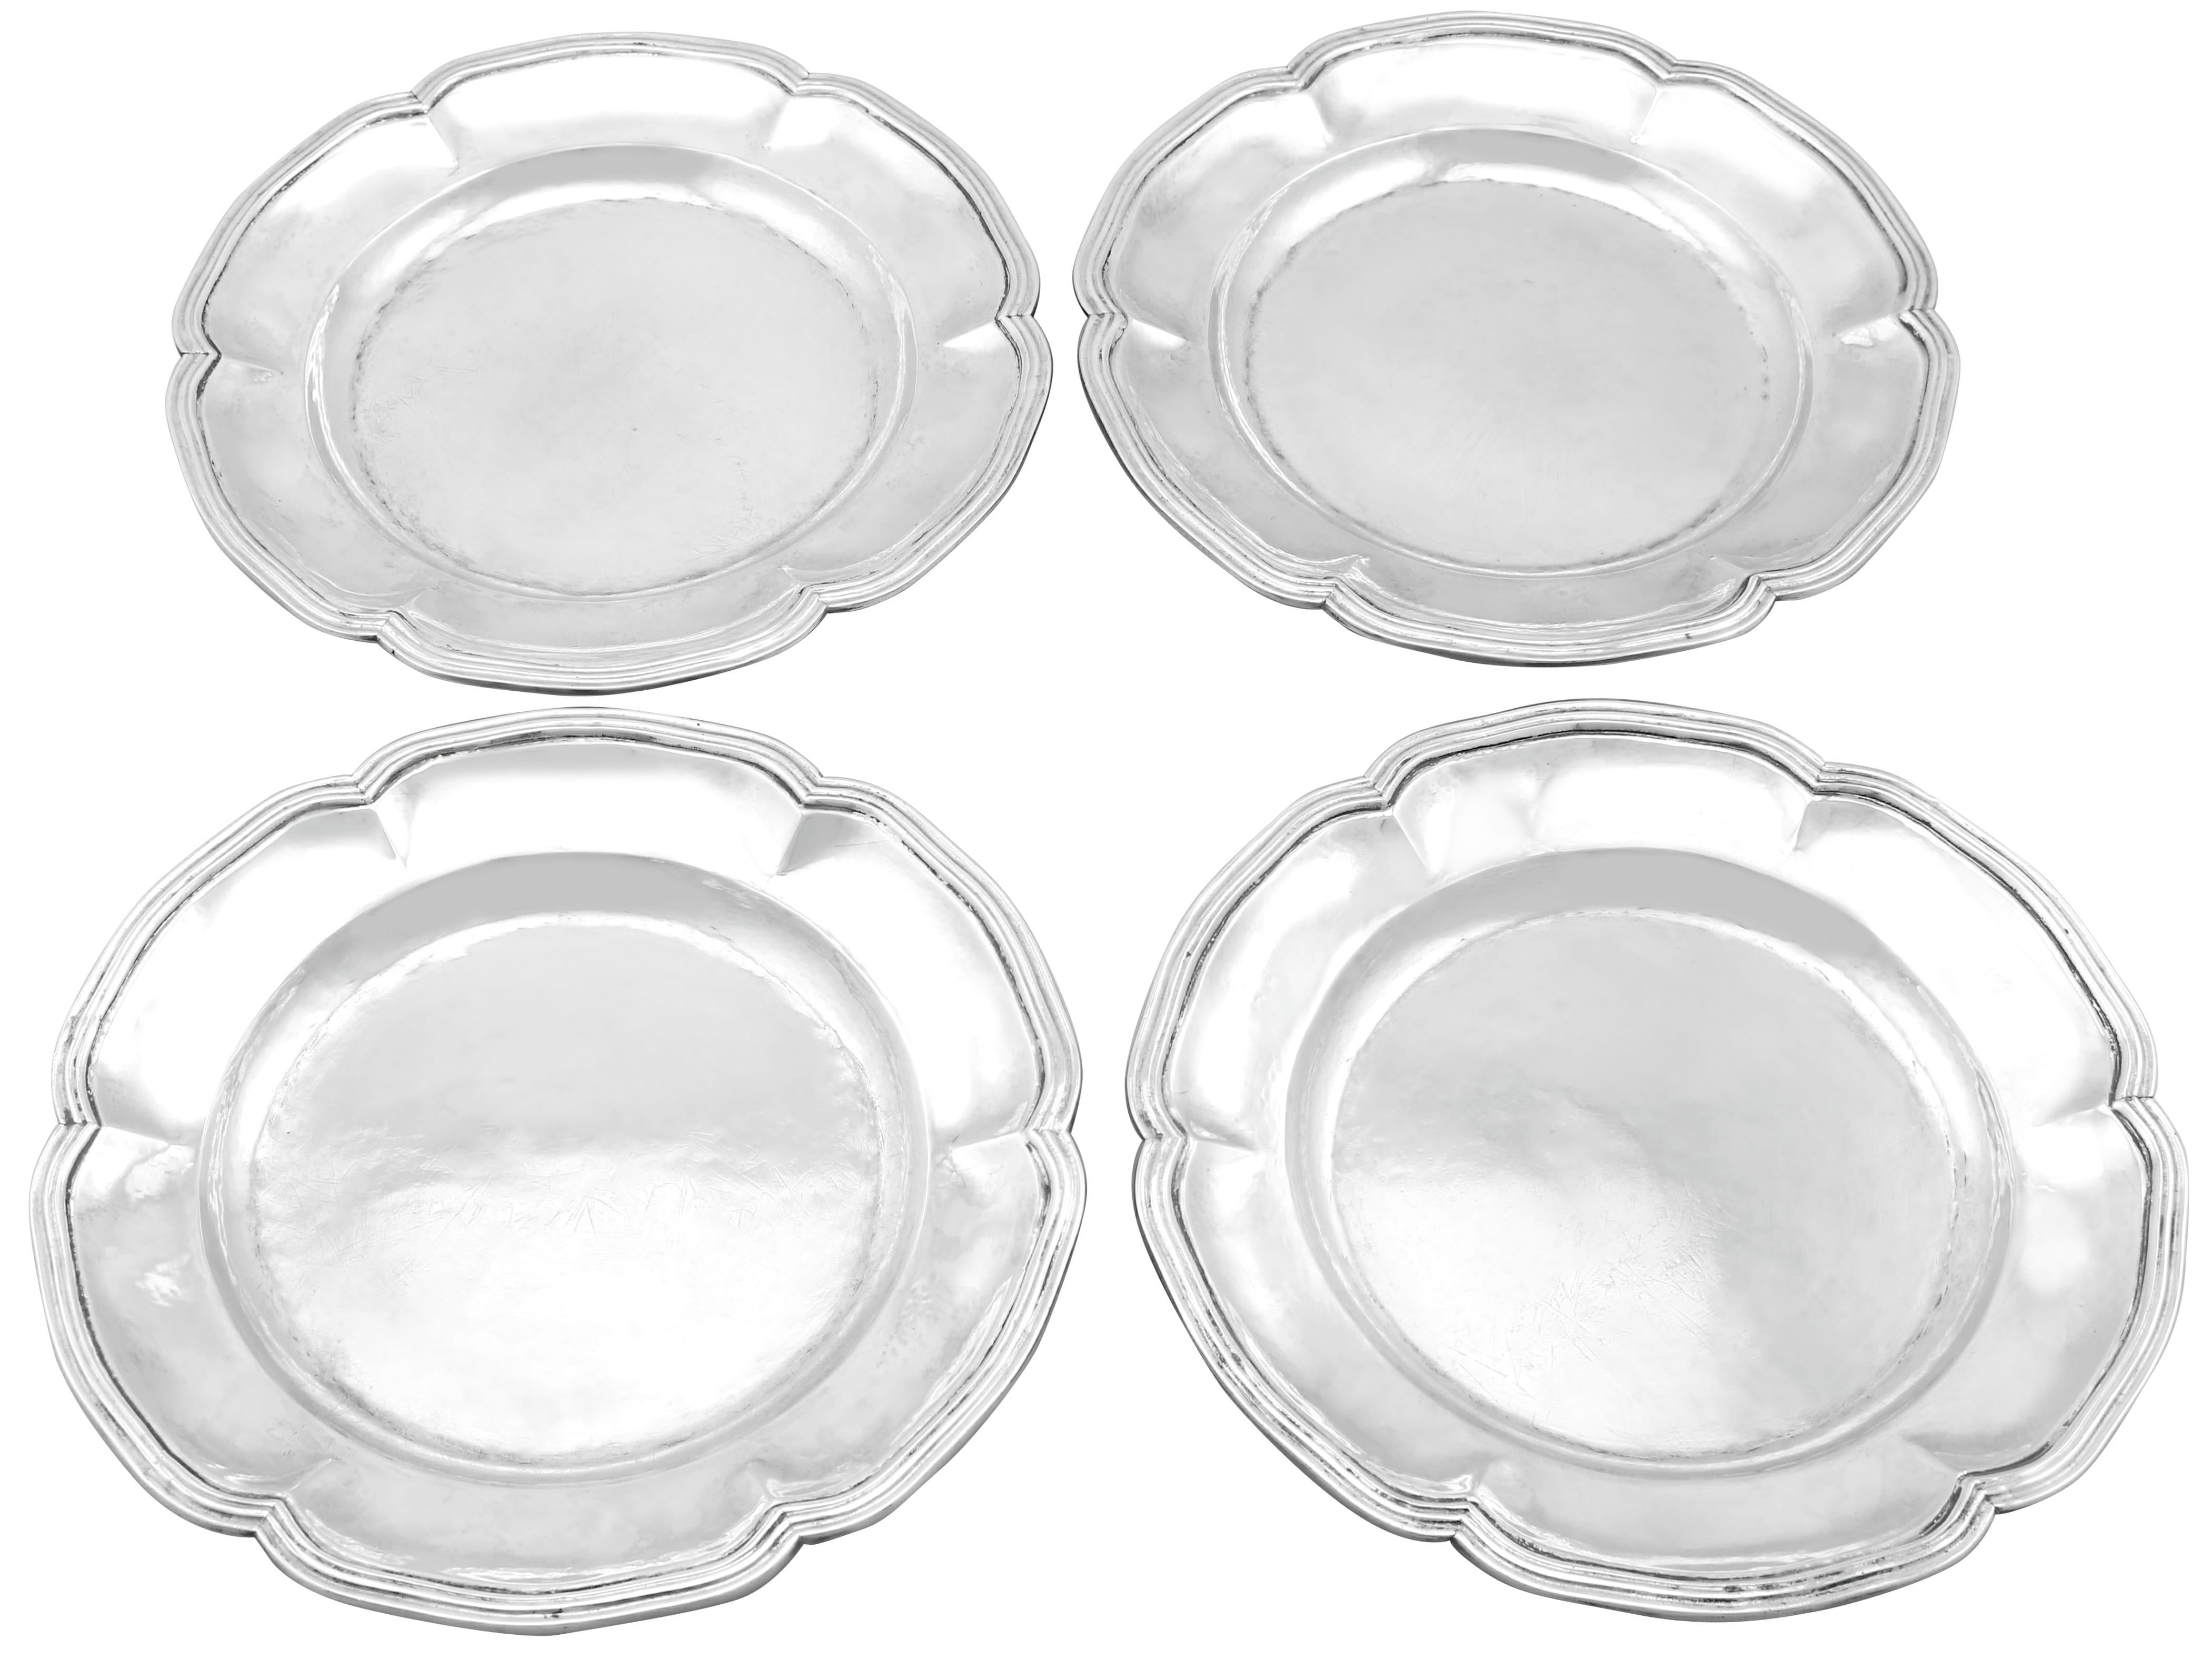 An exceptional, fine and impressive set of four antique Spanish silver dinner plates; an addition to our dining silverware collection

These exceptional antique Spanish silver plates have a circular incurved shaped form with a sunken plain